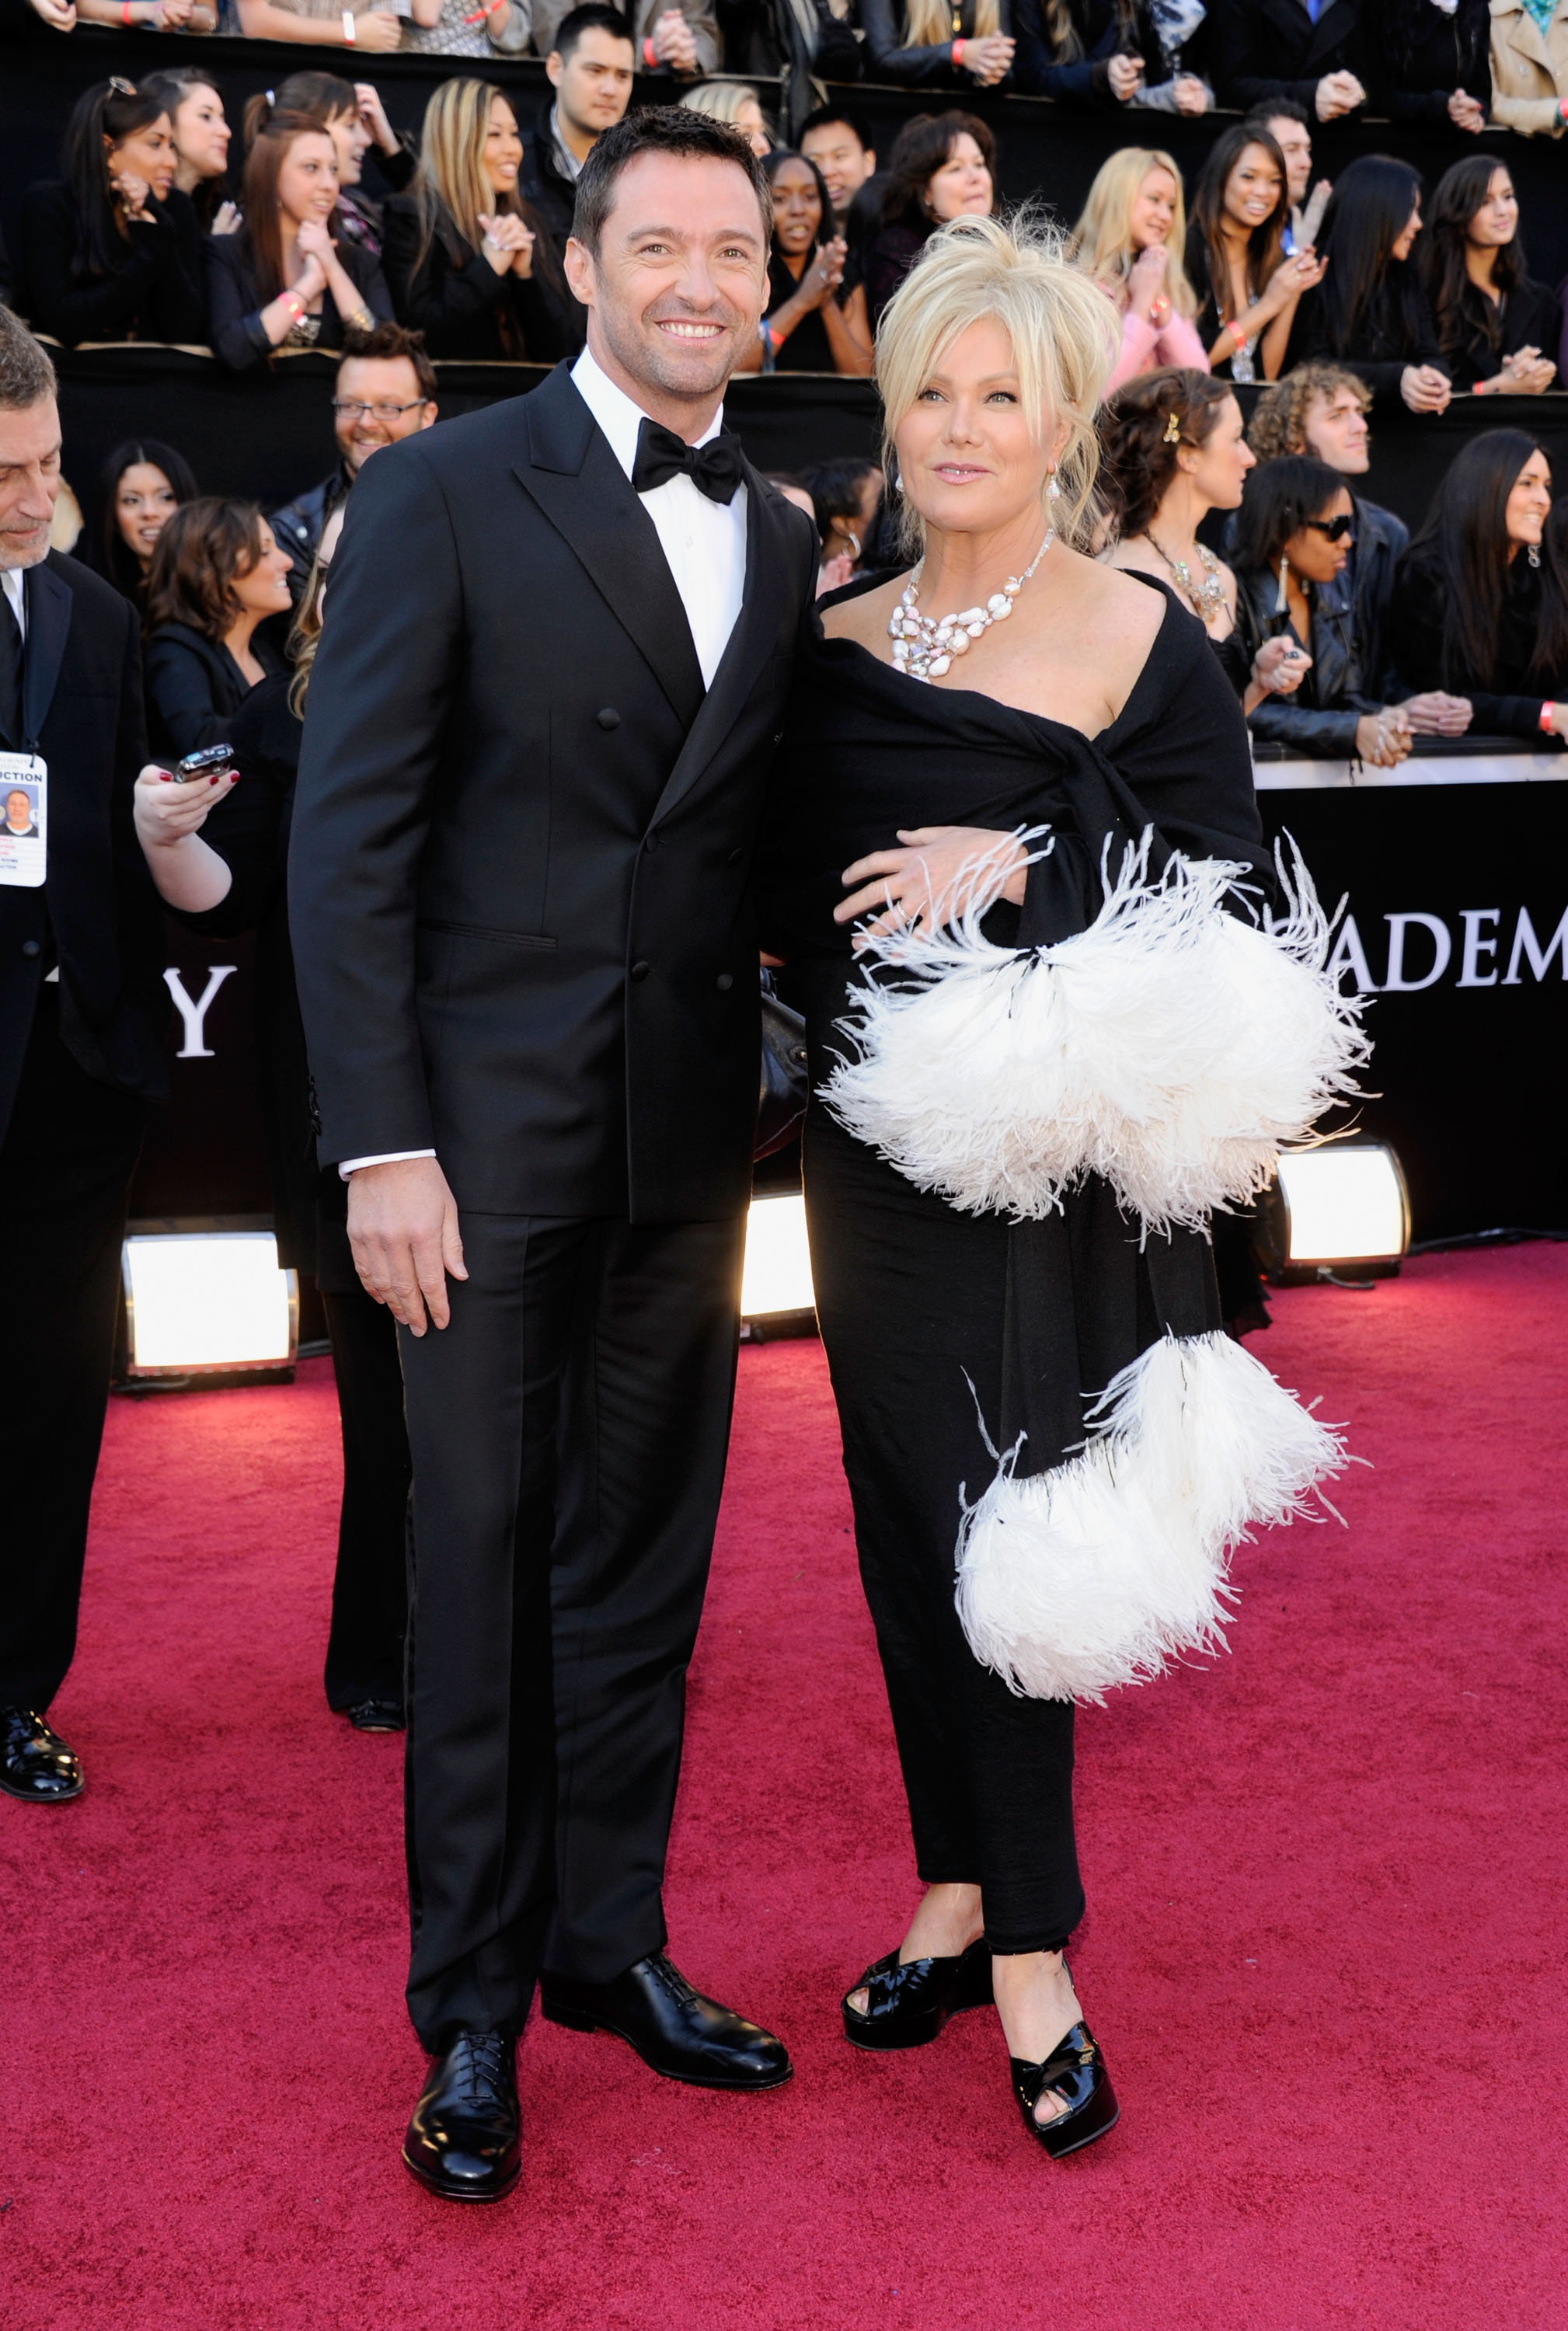 Hugh Jackman and Deborra-Lee Furness in Hollywood, California on February 27, 2011 | Source: Getty Images